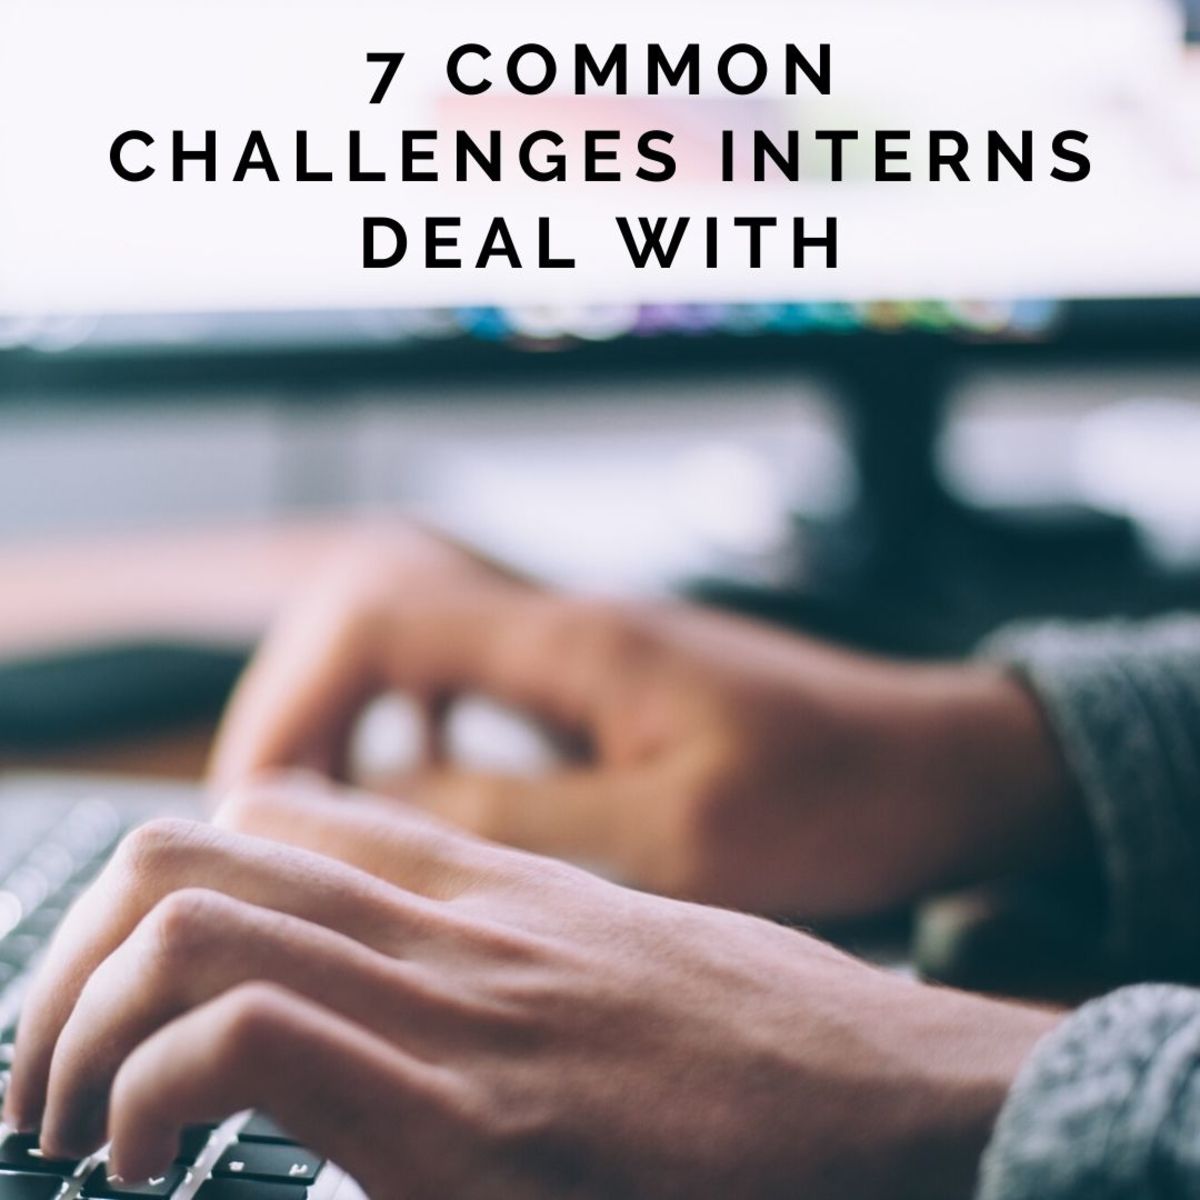 7 Common Challenges Faced by Interns